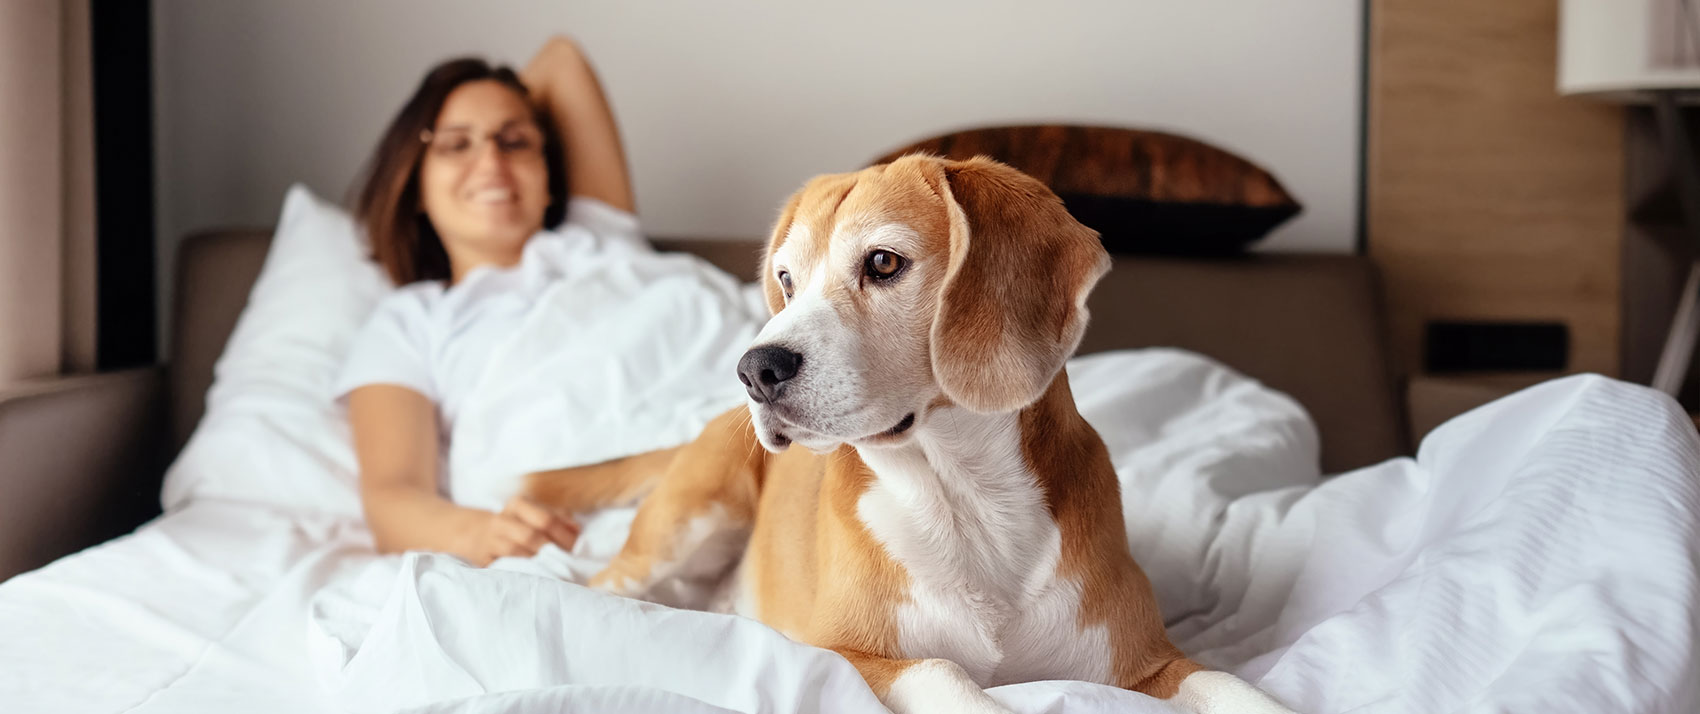 Dog and woman on hotel bed